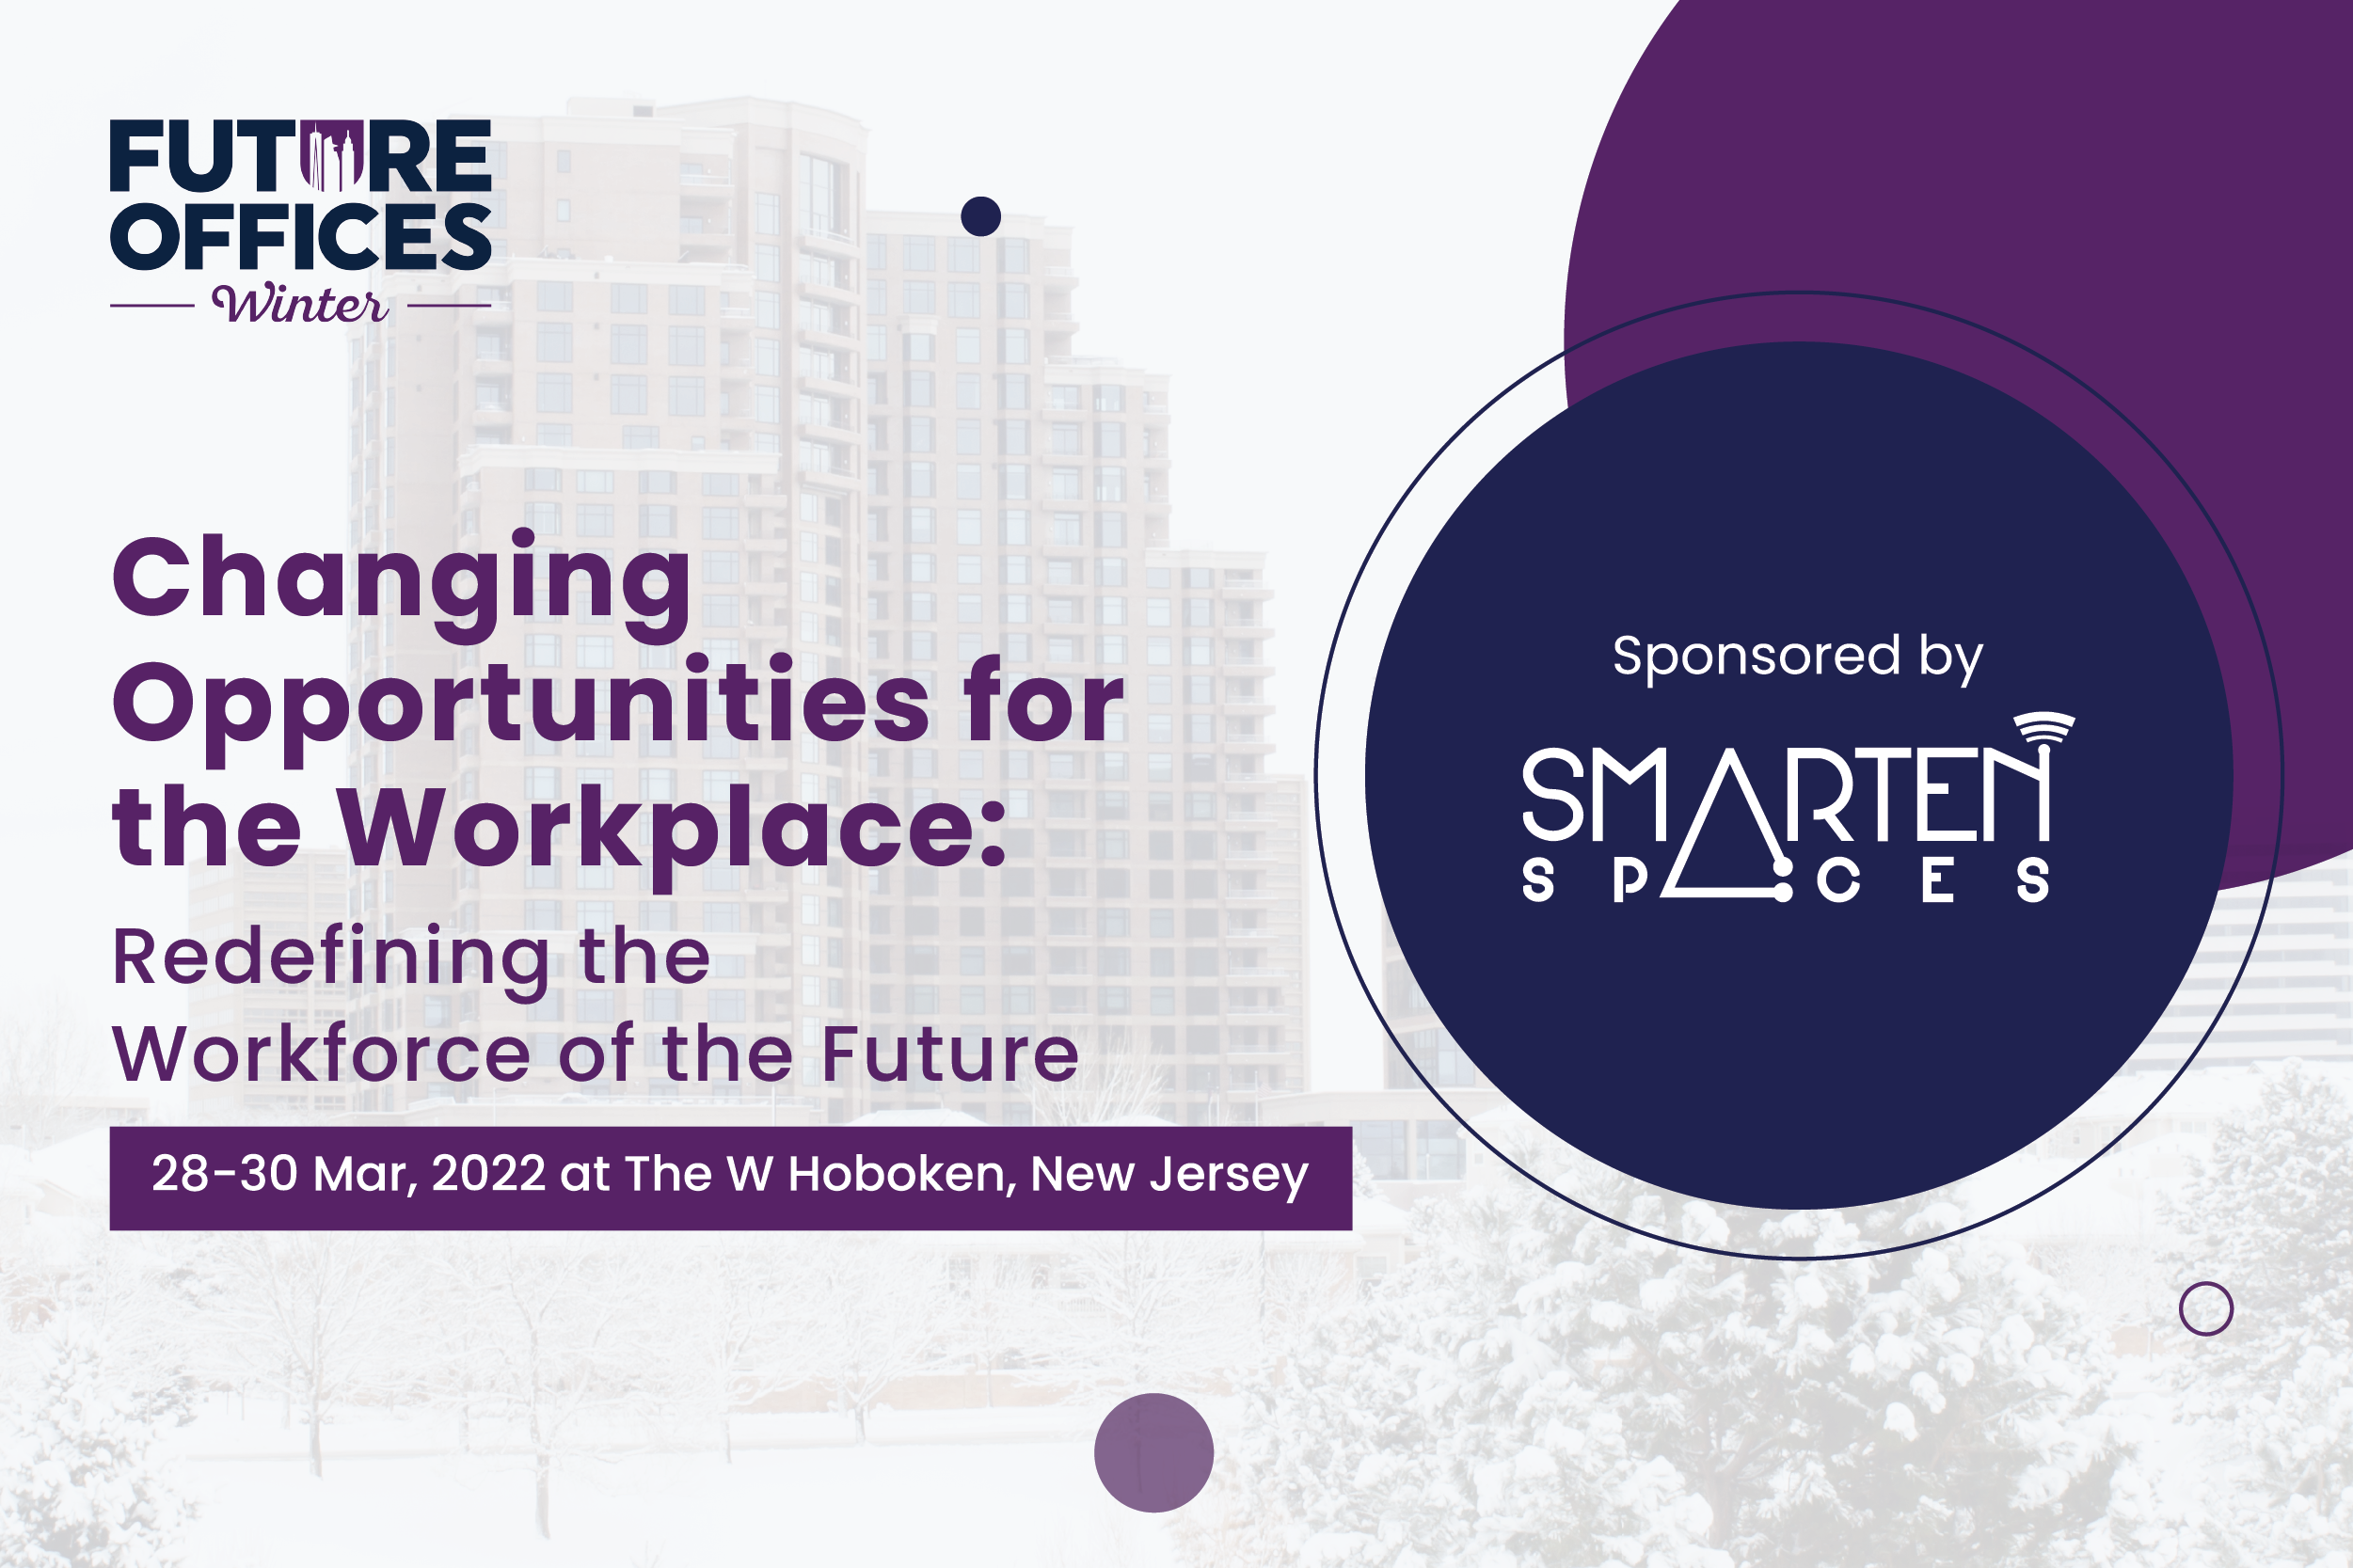 Smarten Spaces partners with Future Offices Winter as a Sponsor